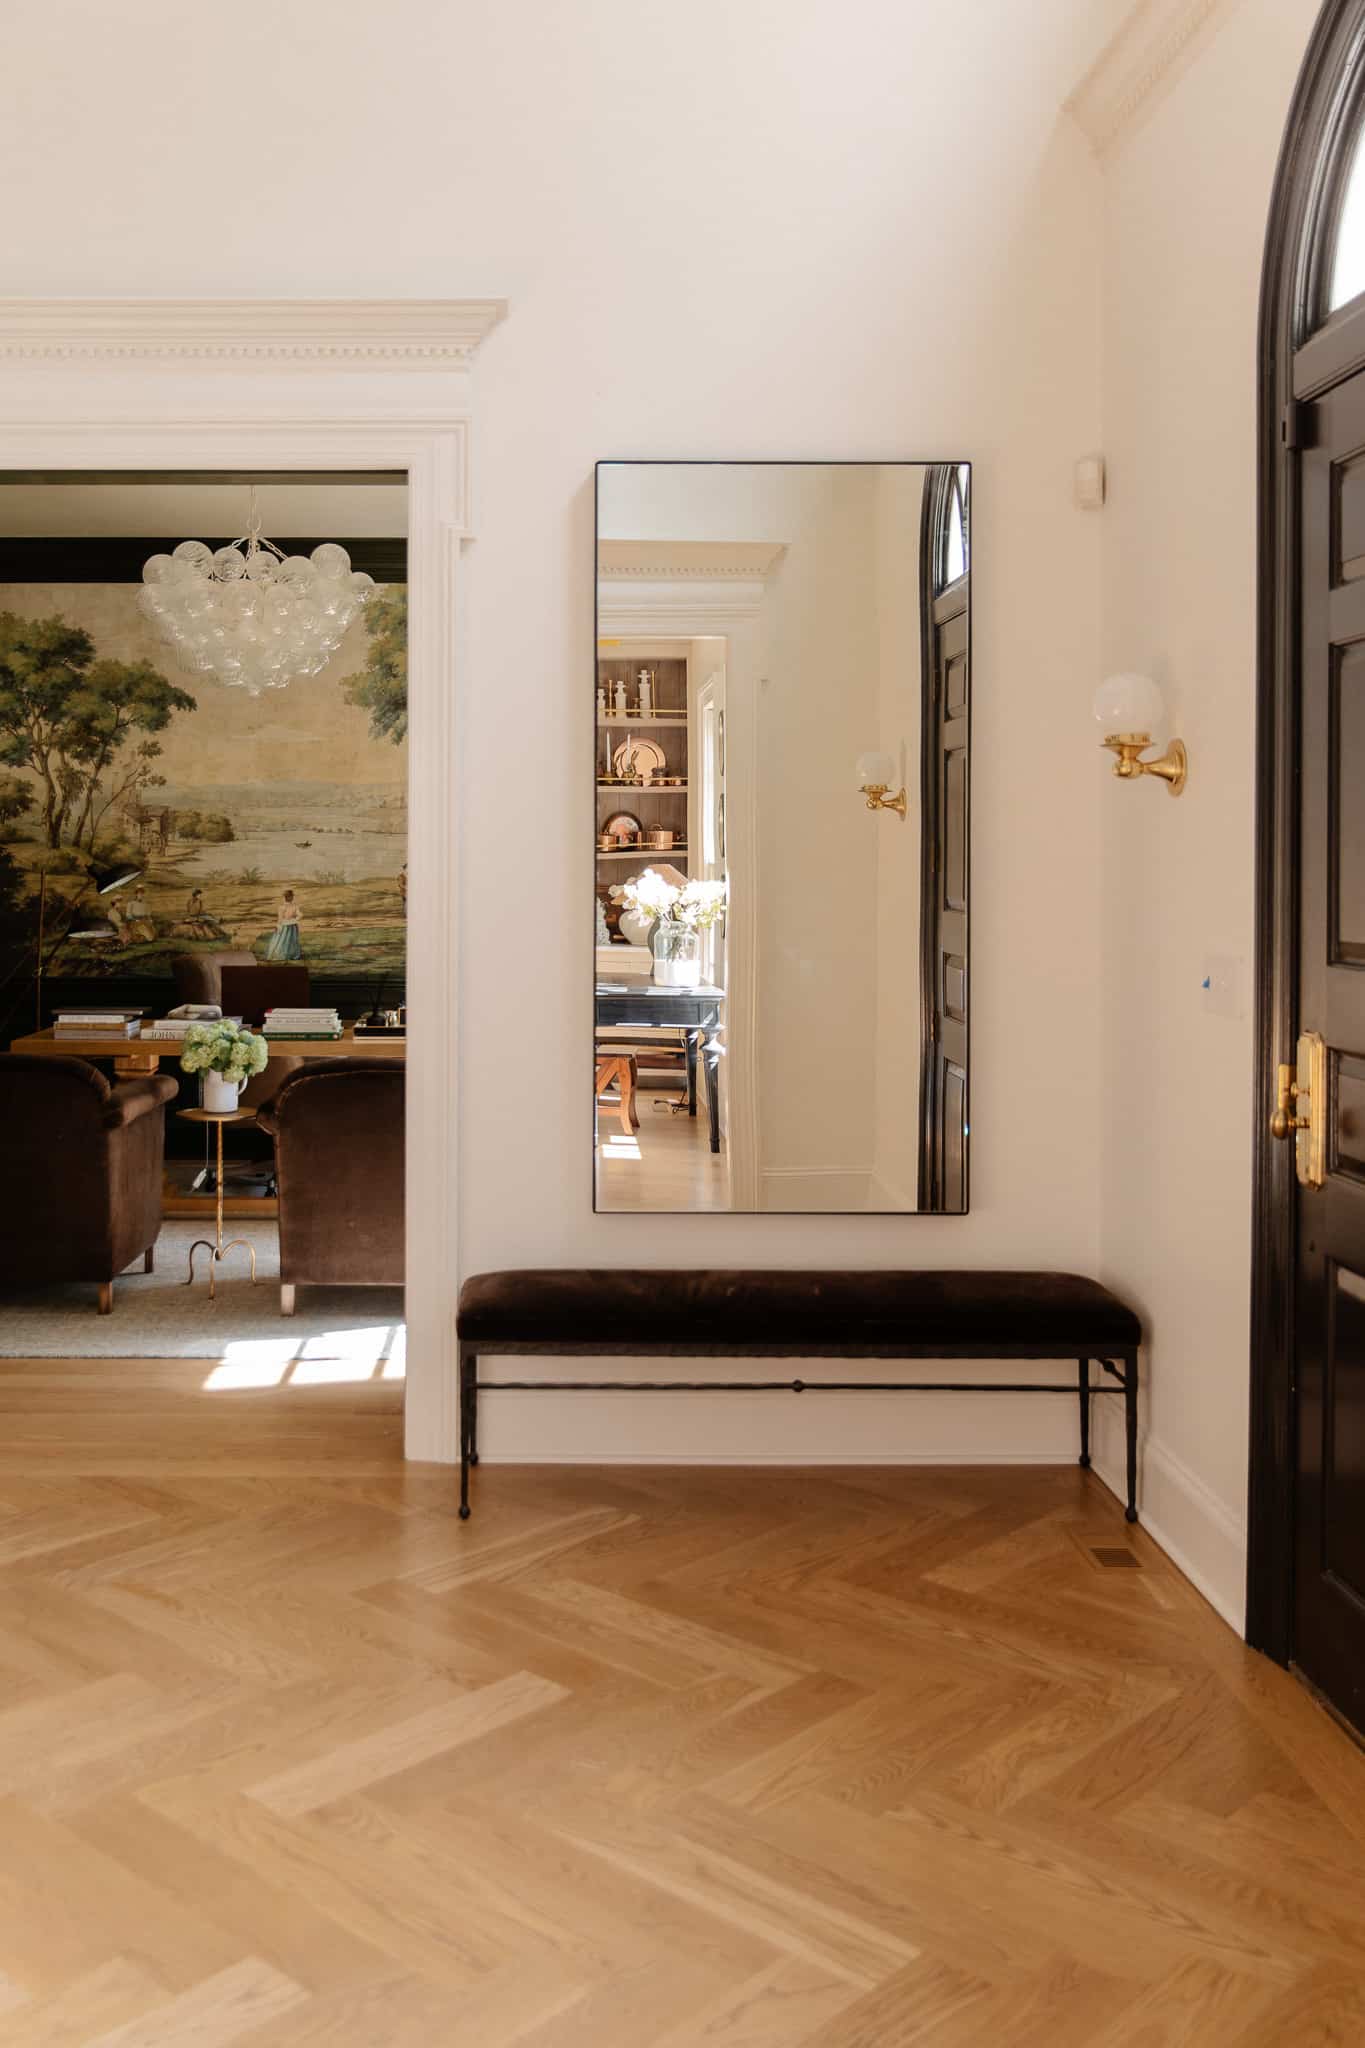 Choose the Best Mirror for Your Home